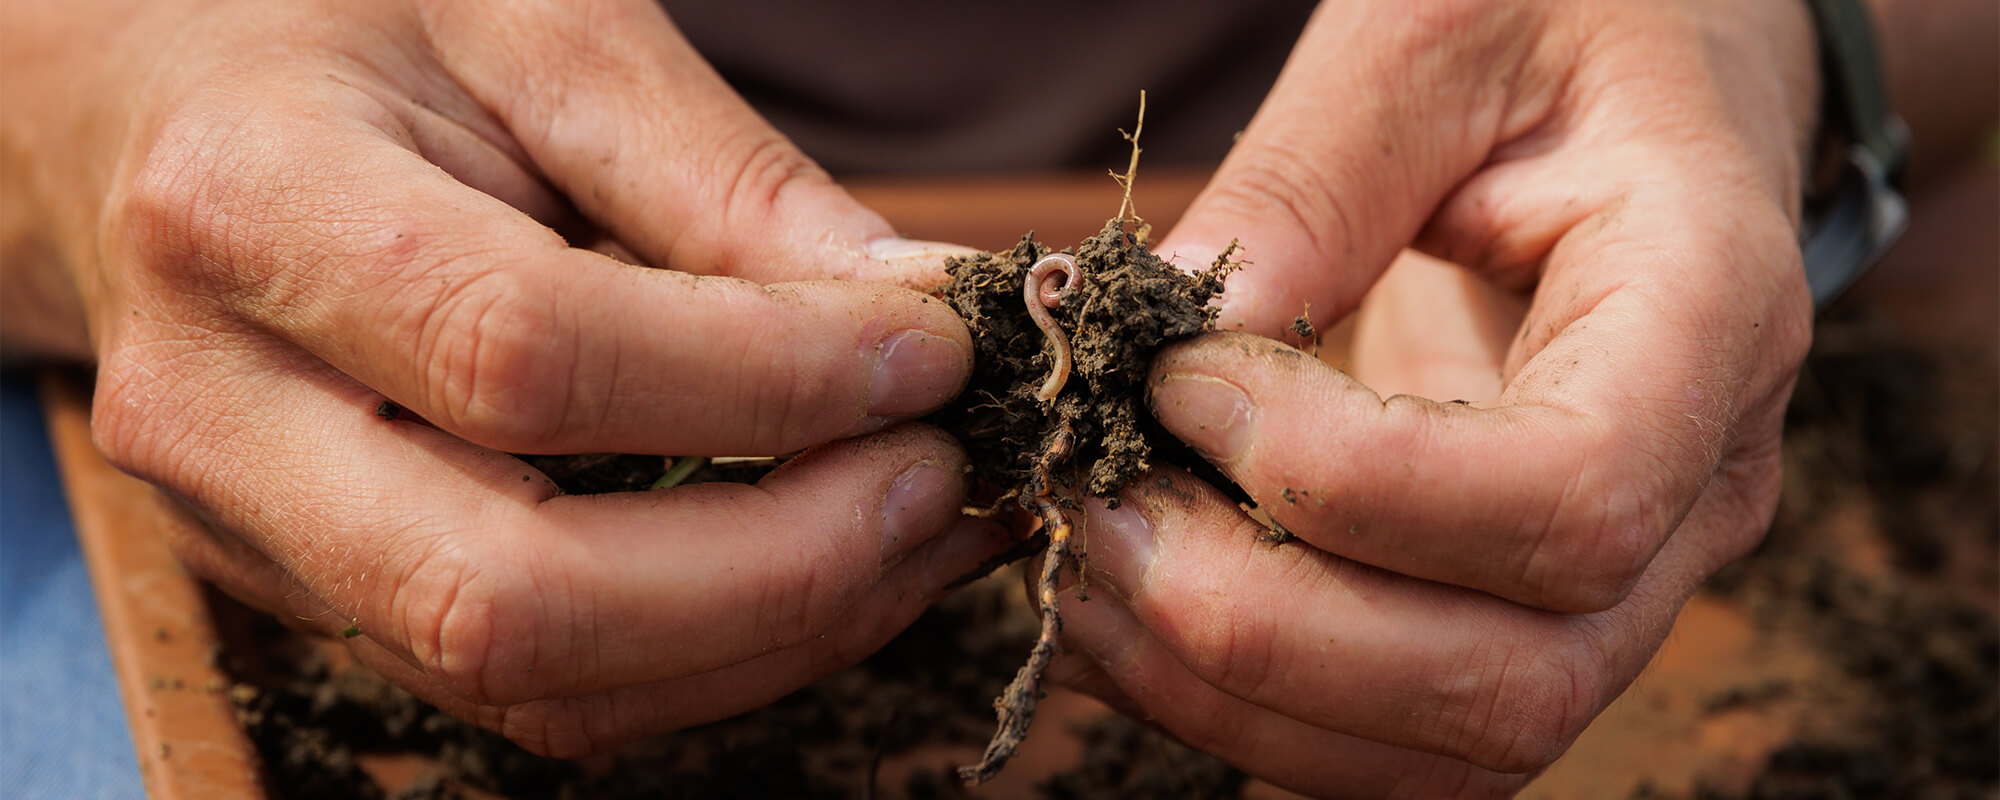 Hands holding earthworm and soil